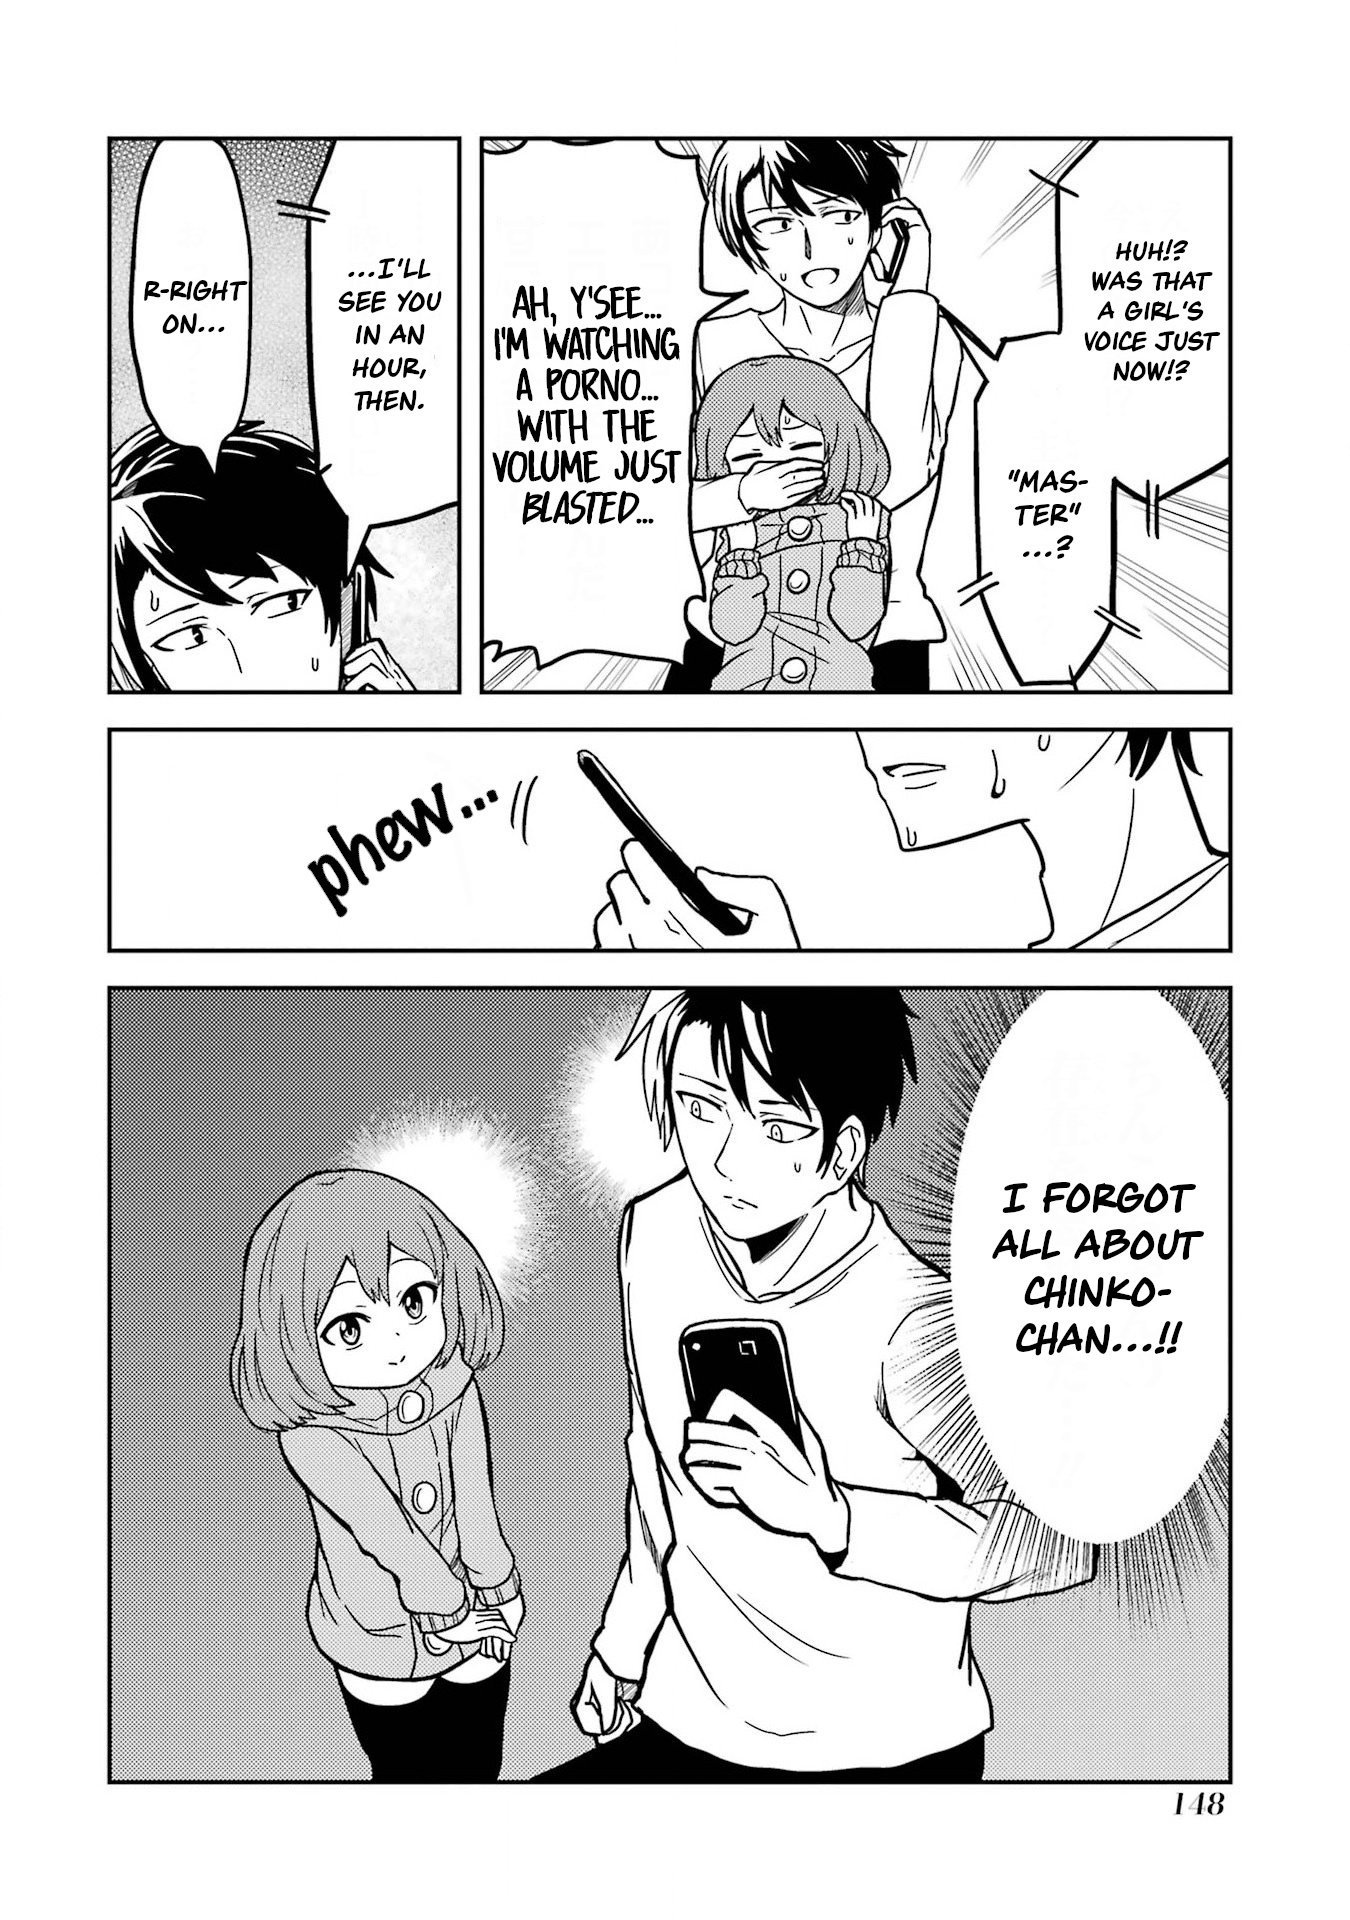 Turns Out My Dick Was A Cute Girl Vol.1 Chapter 11: My Dick And My Friend. - Picture 2